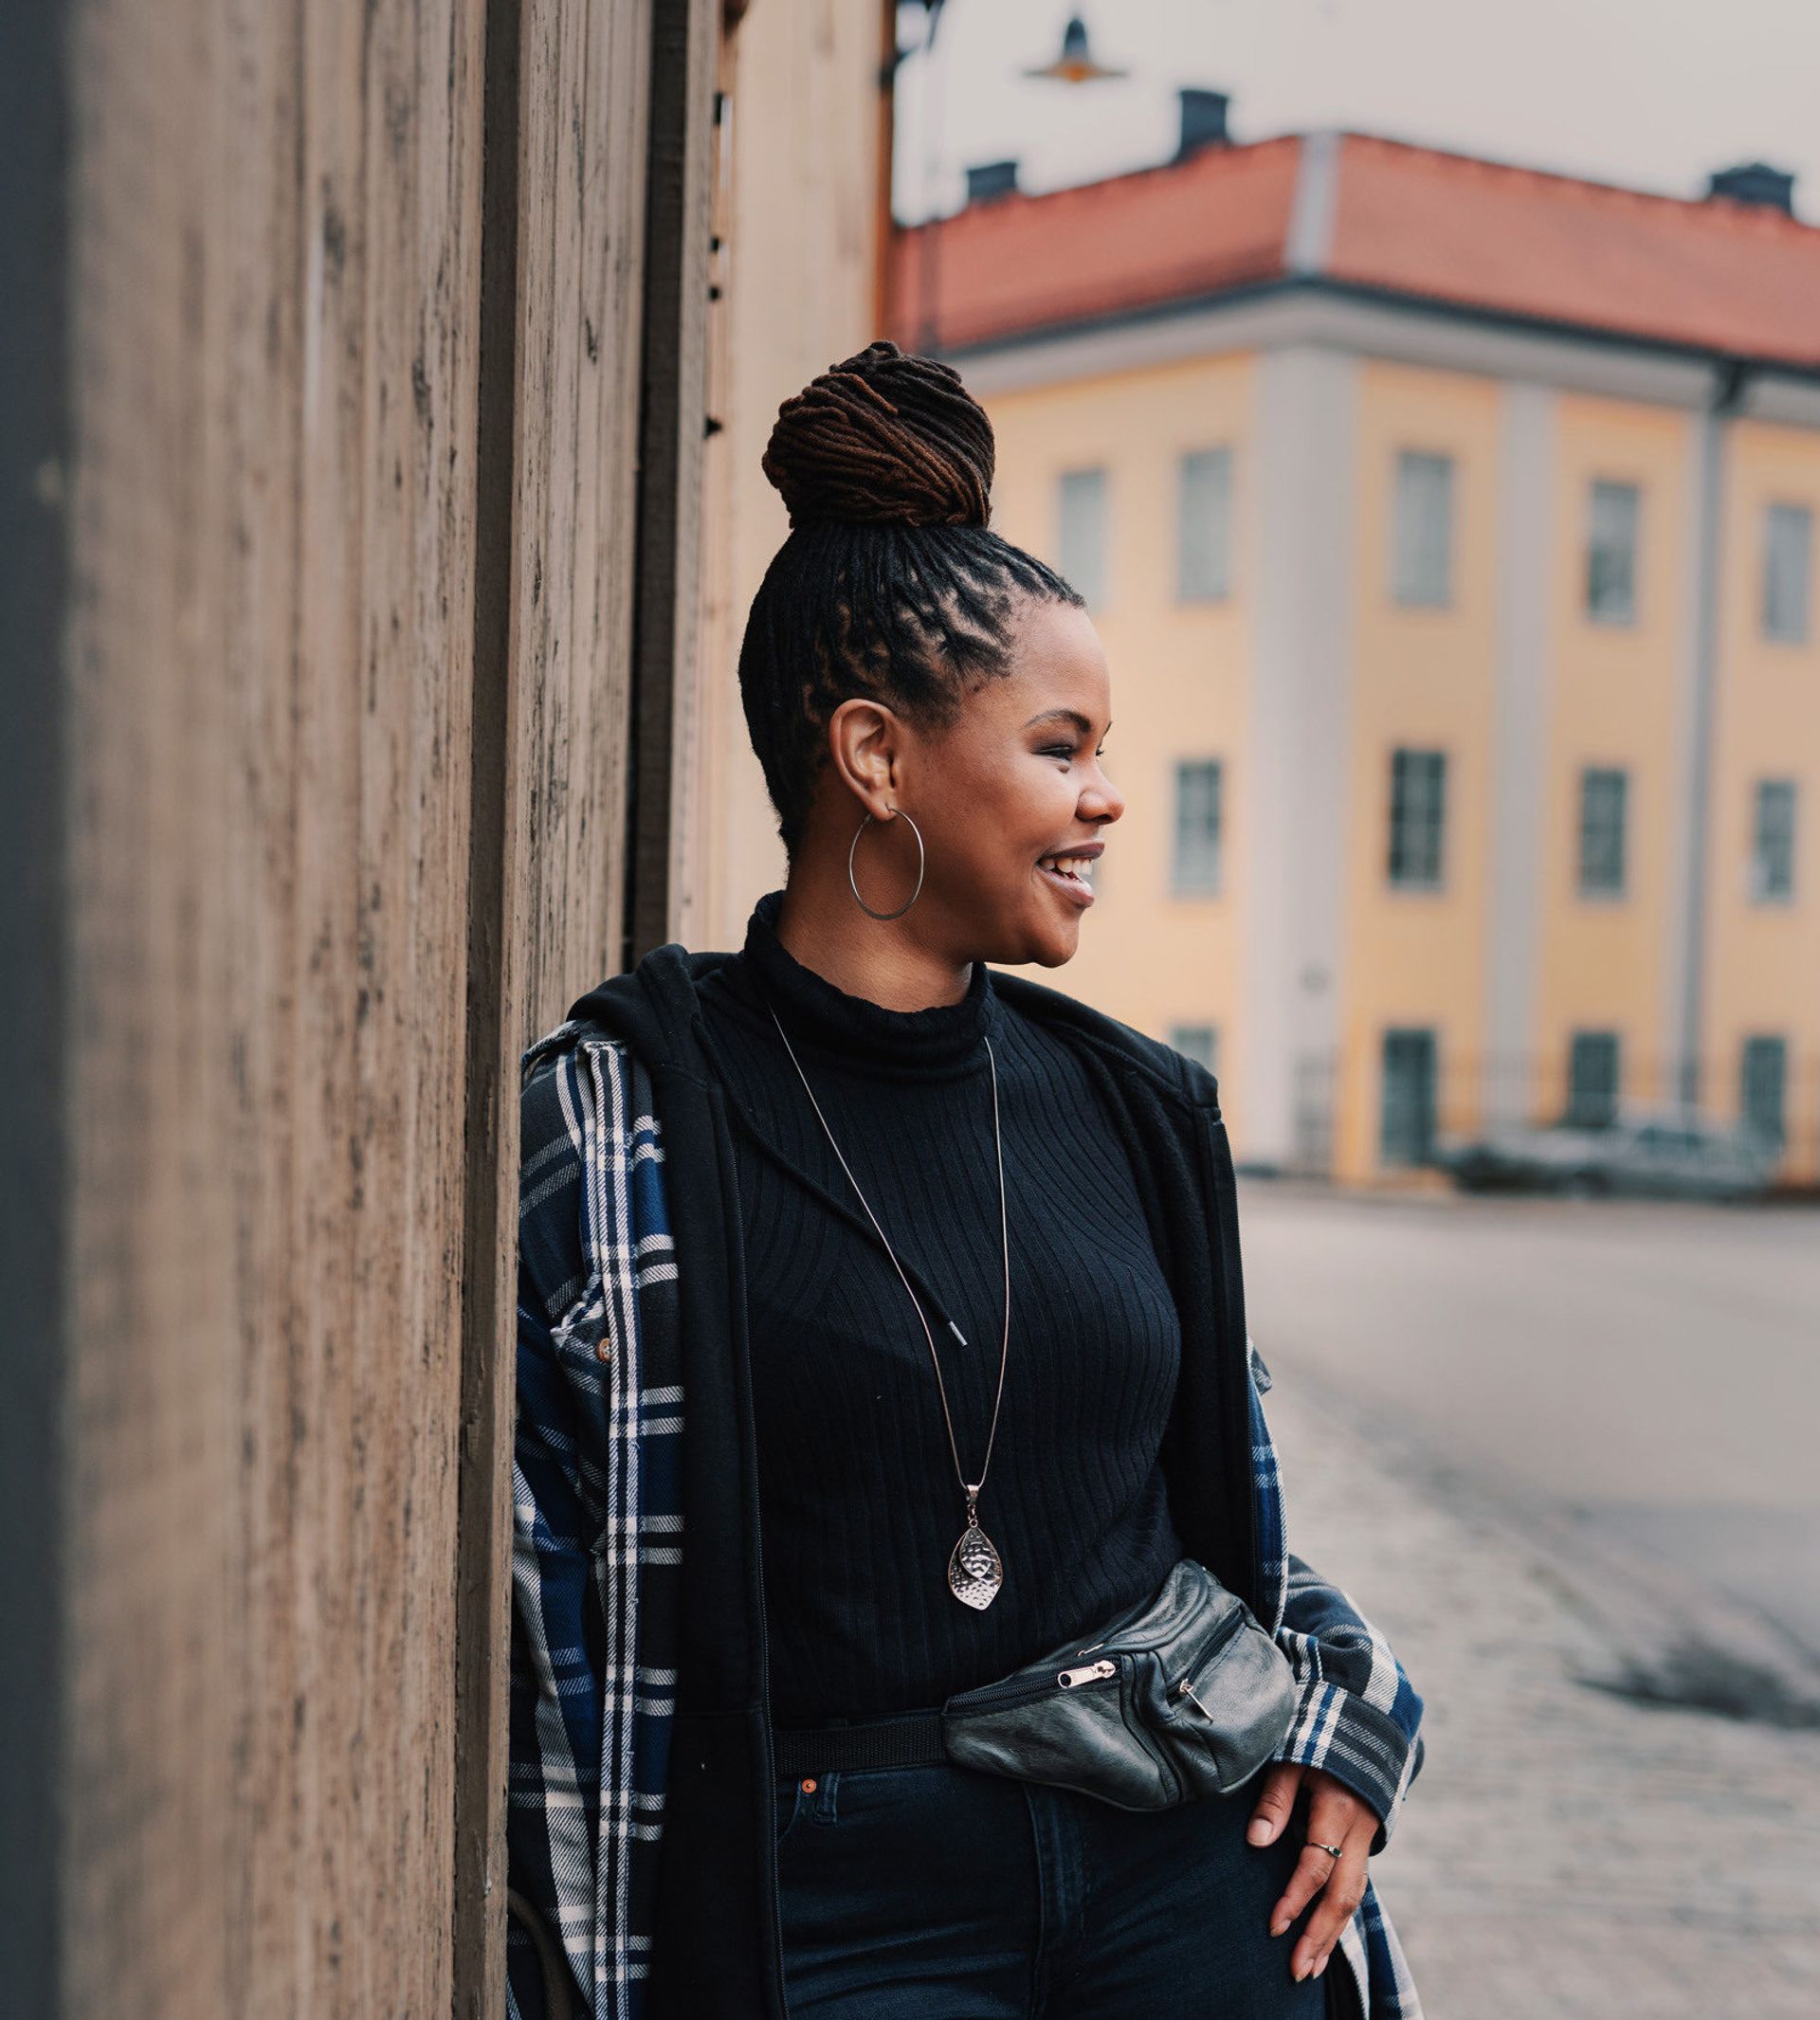 Student from South Africa studying in Sweden